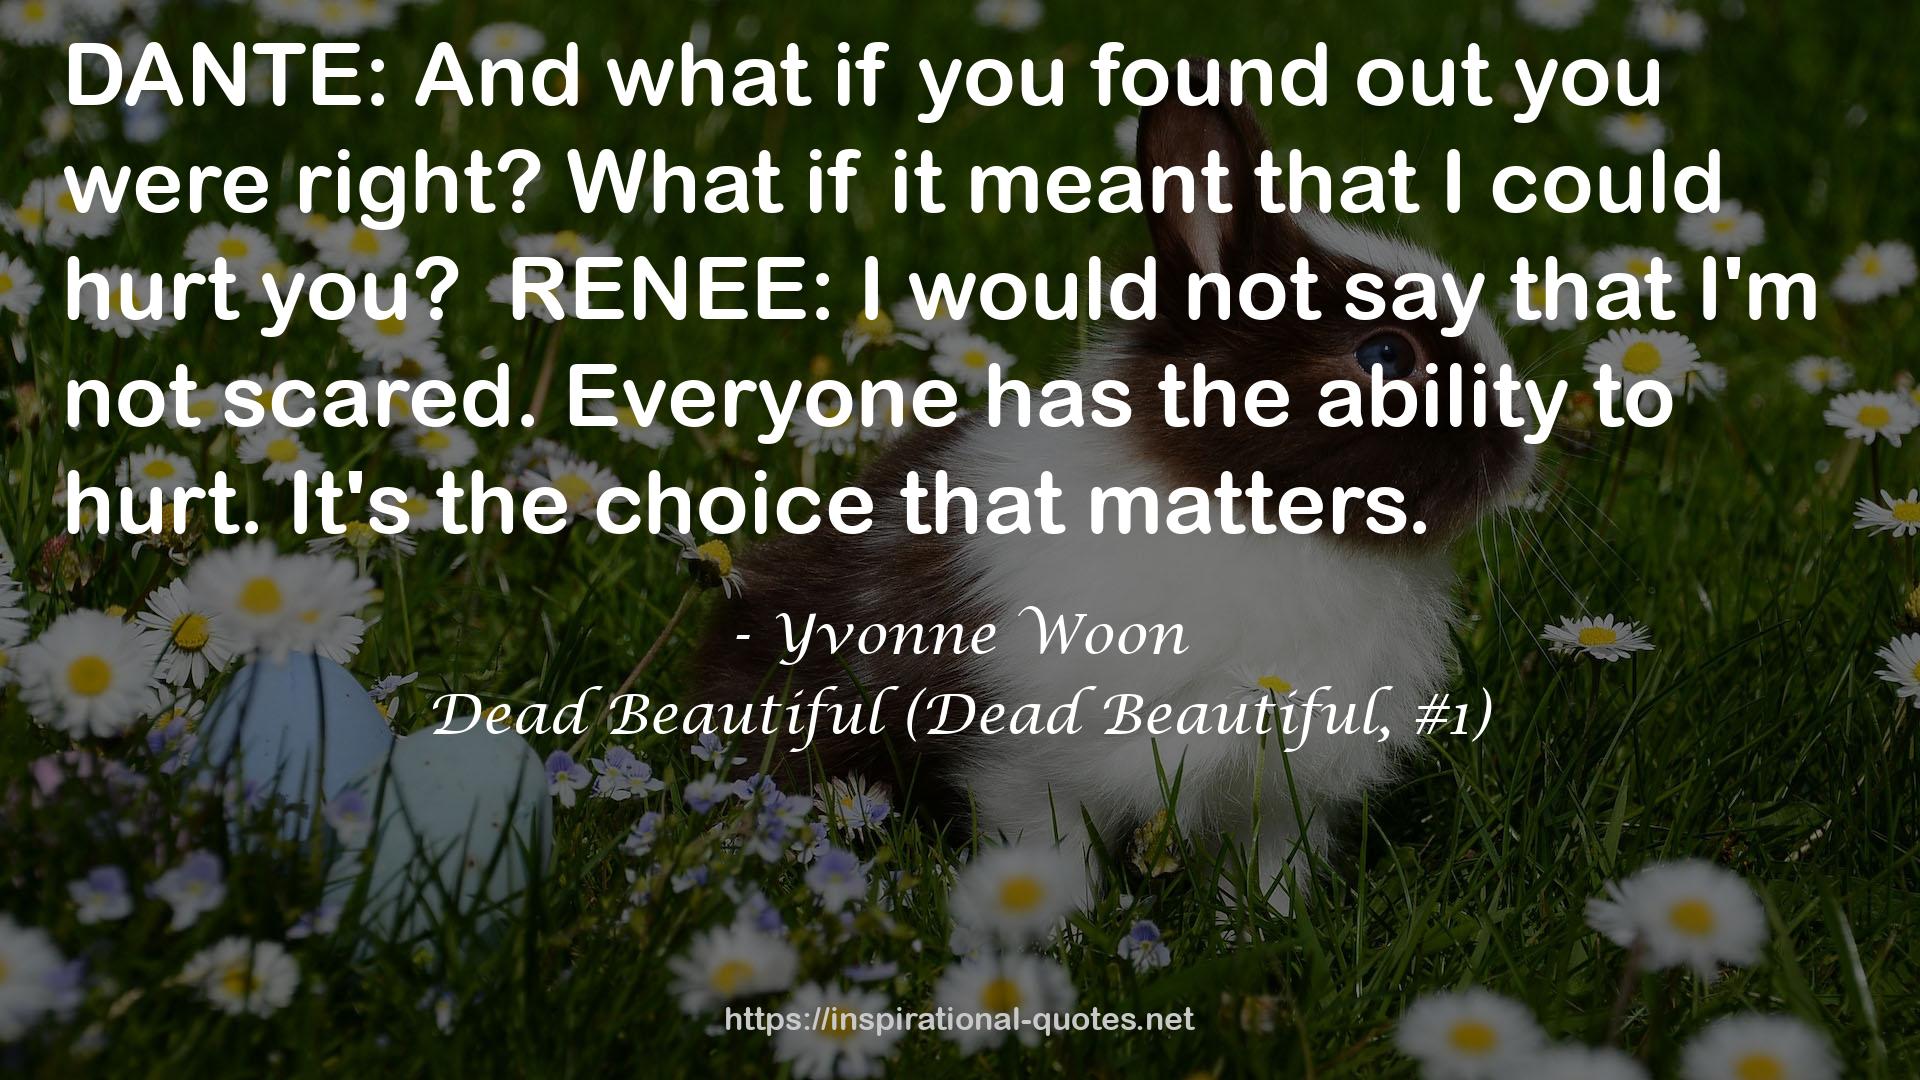 Dead Beautiful (Dead Beautiful, #1) QUOTES